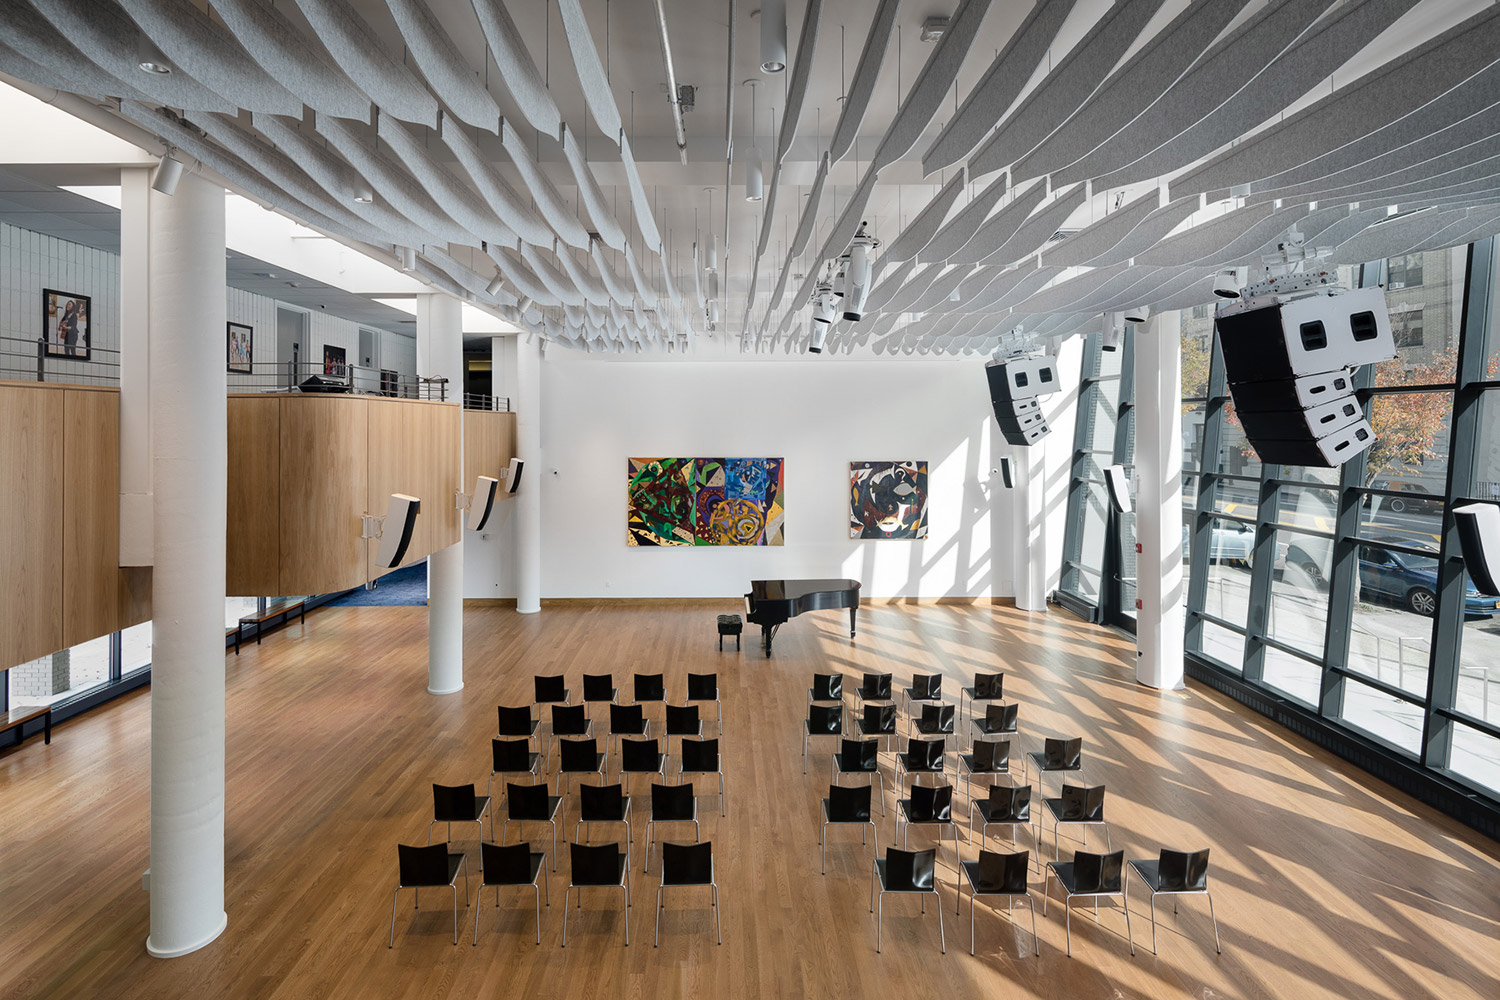 Harlem School of the Arts renovated with the help of the Herb Alpert Foundation. WSDG engaged for acoustics services.